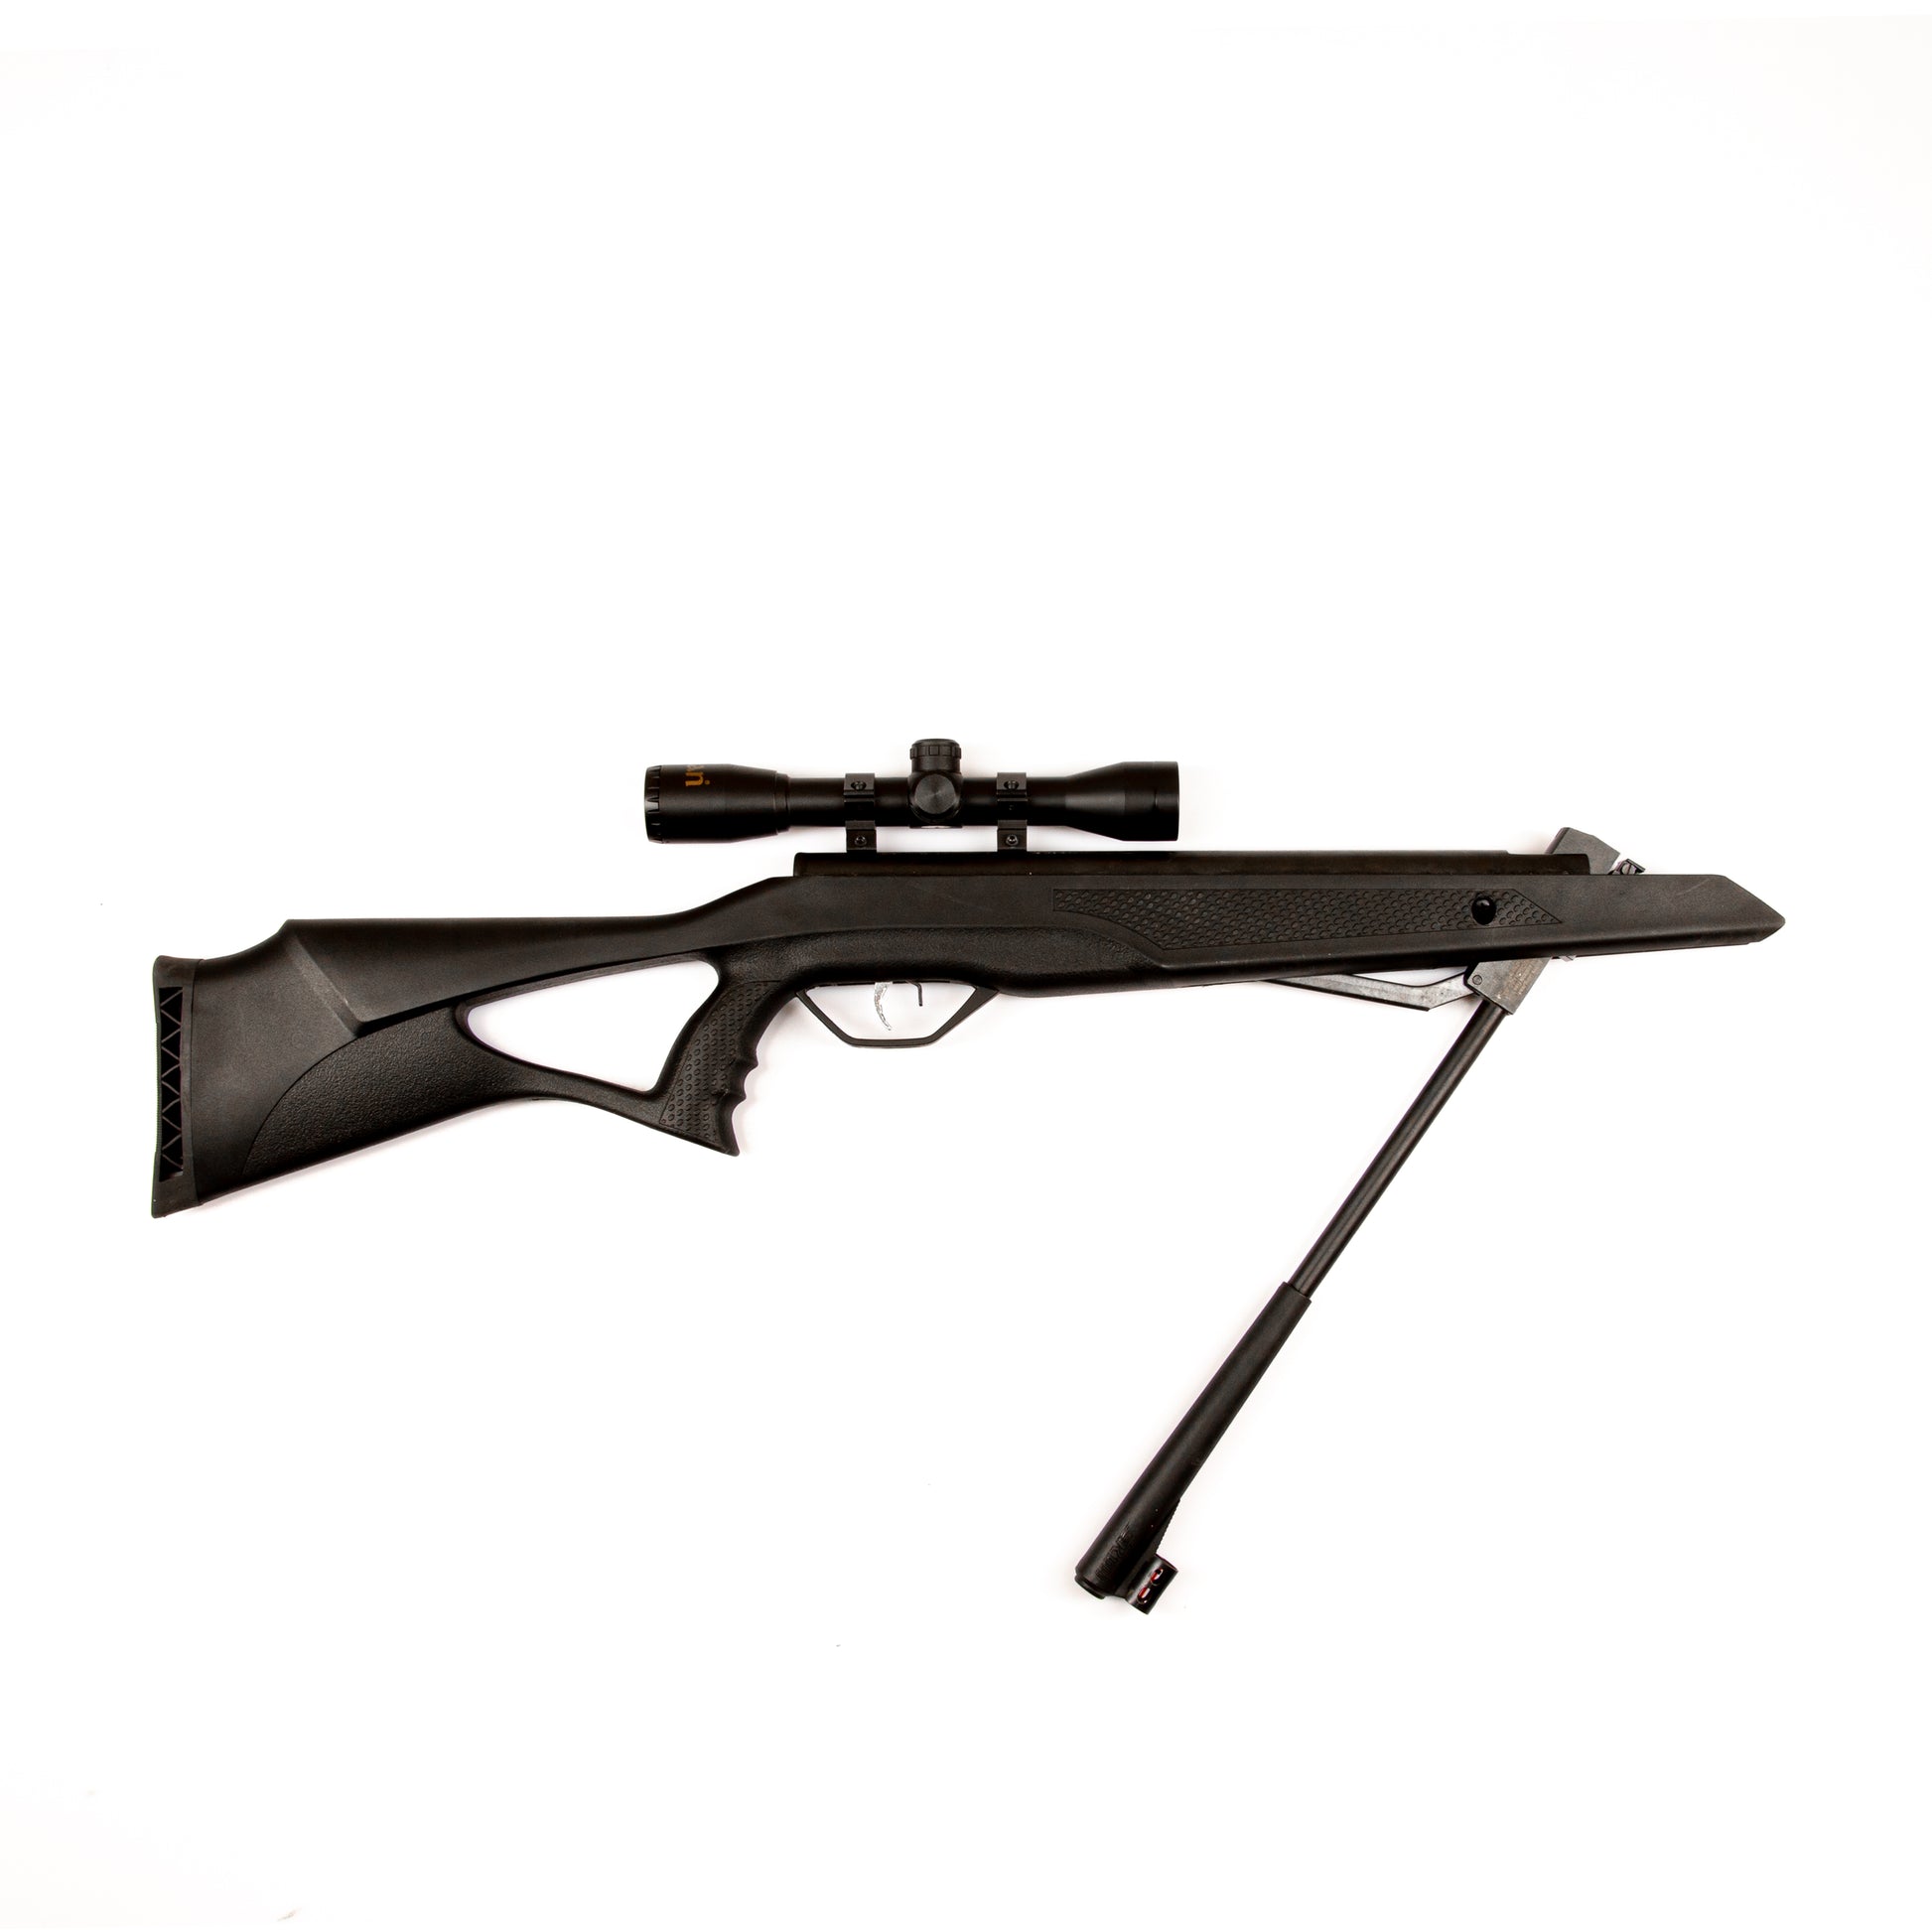 Beeman "Longhorn" .177 Air Rifle Combo with Black Synthetic stock with pistol grip